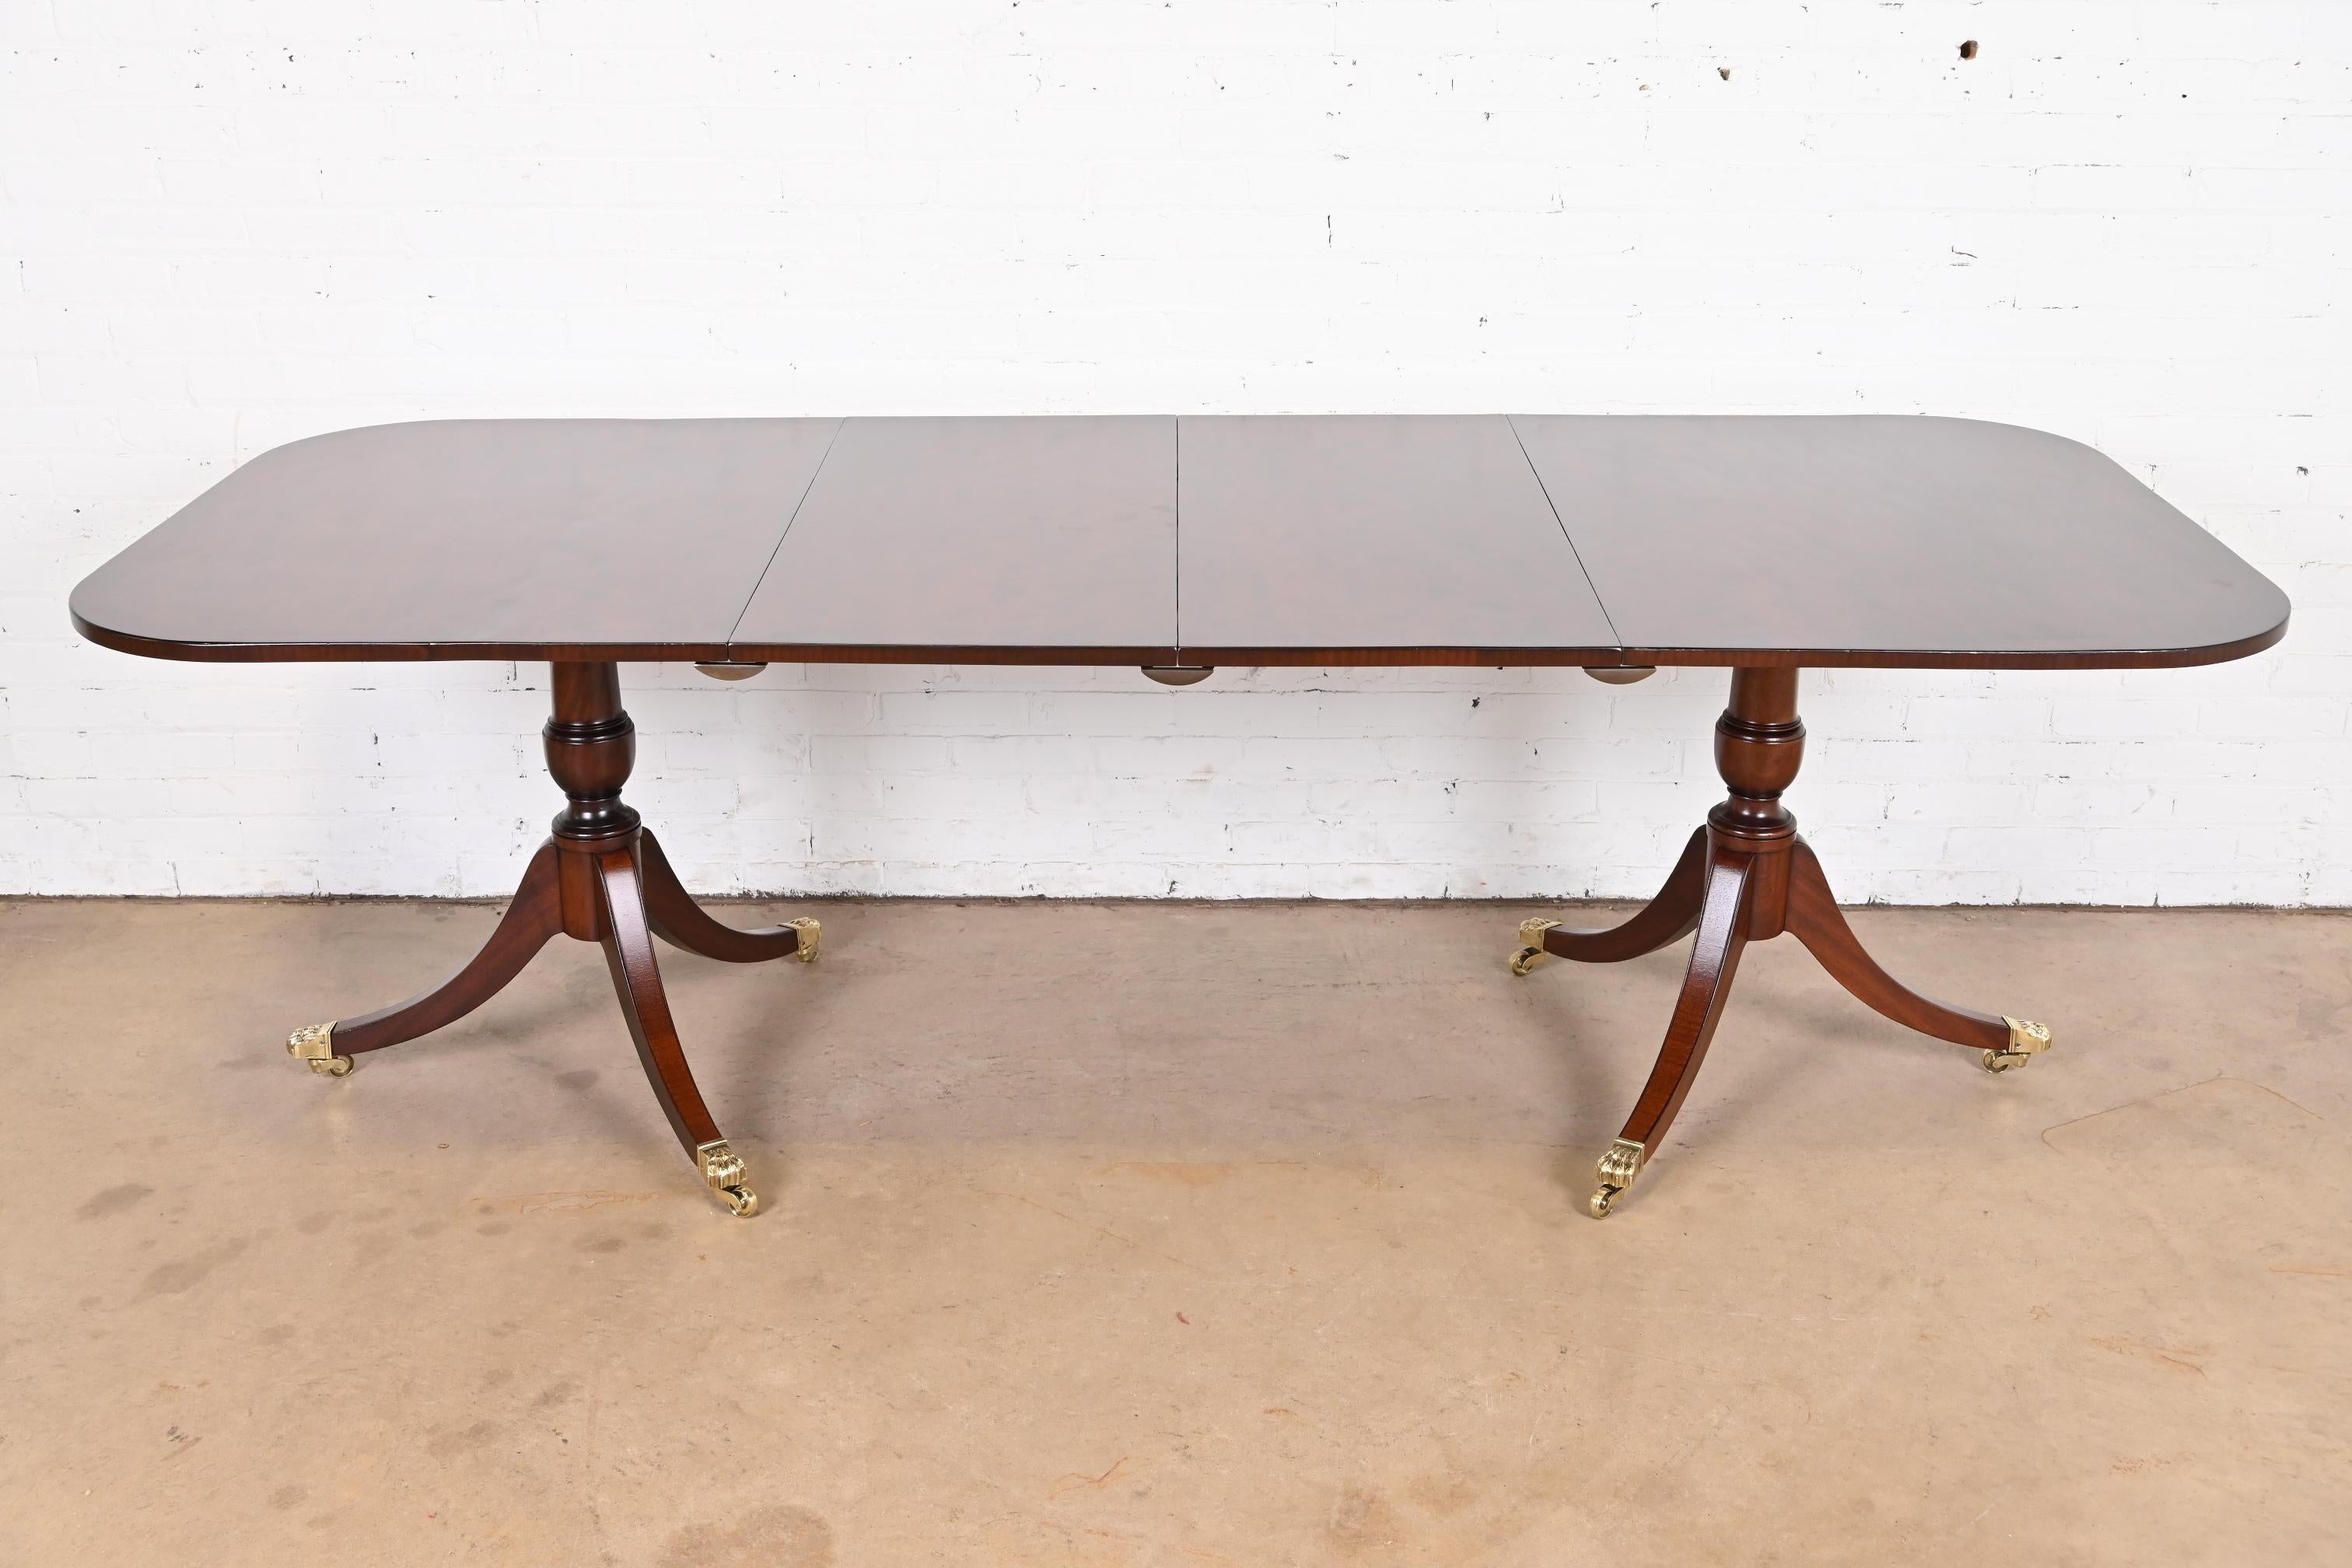 A gorgeous Georgian or Regency style double pedestal extension dining table

In the manner of Baker Furniture

USA, Circa 1960s

Beautiful banded mahogany, with carved solid mahogany pedestals, and brass-capped paw feet on brass castors.

Measures: